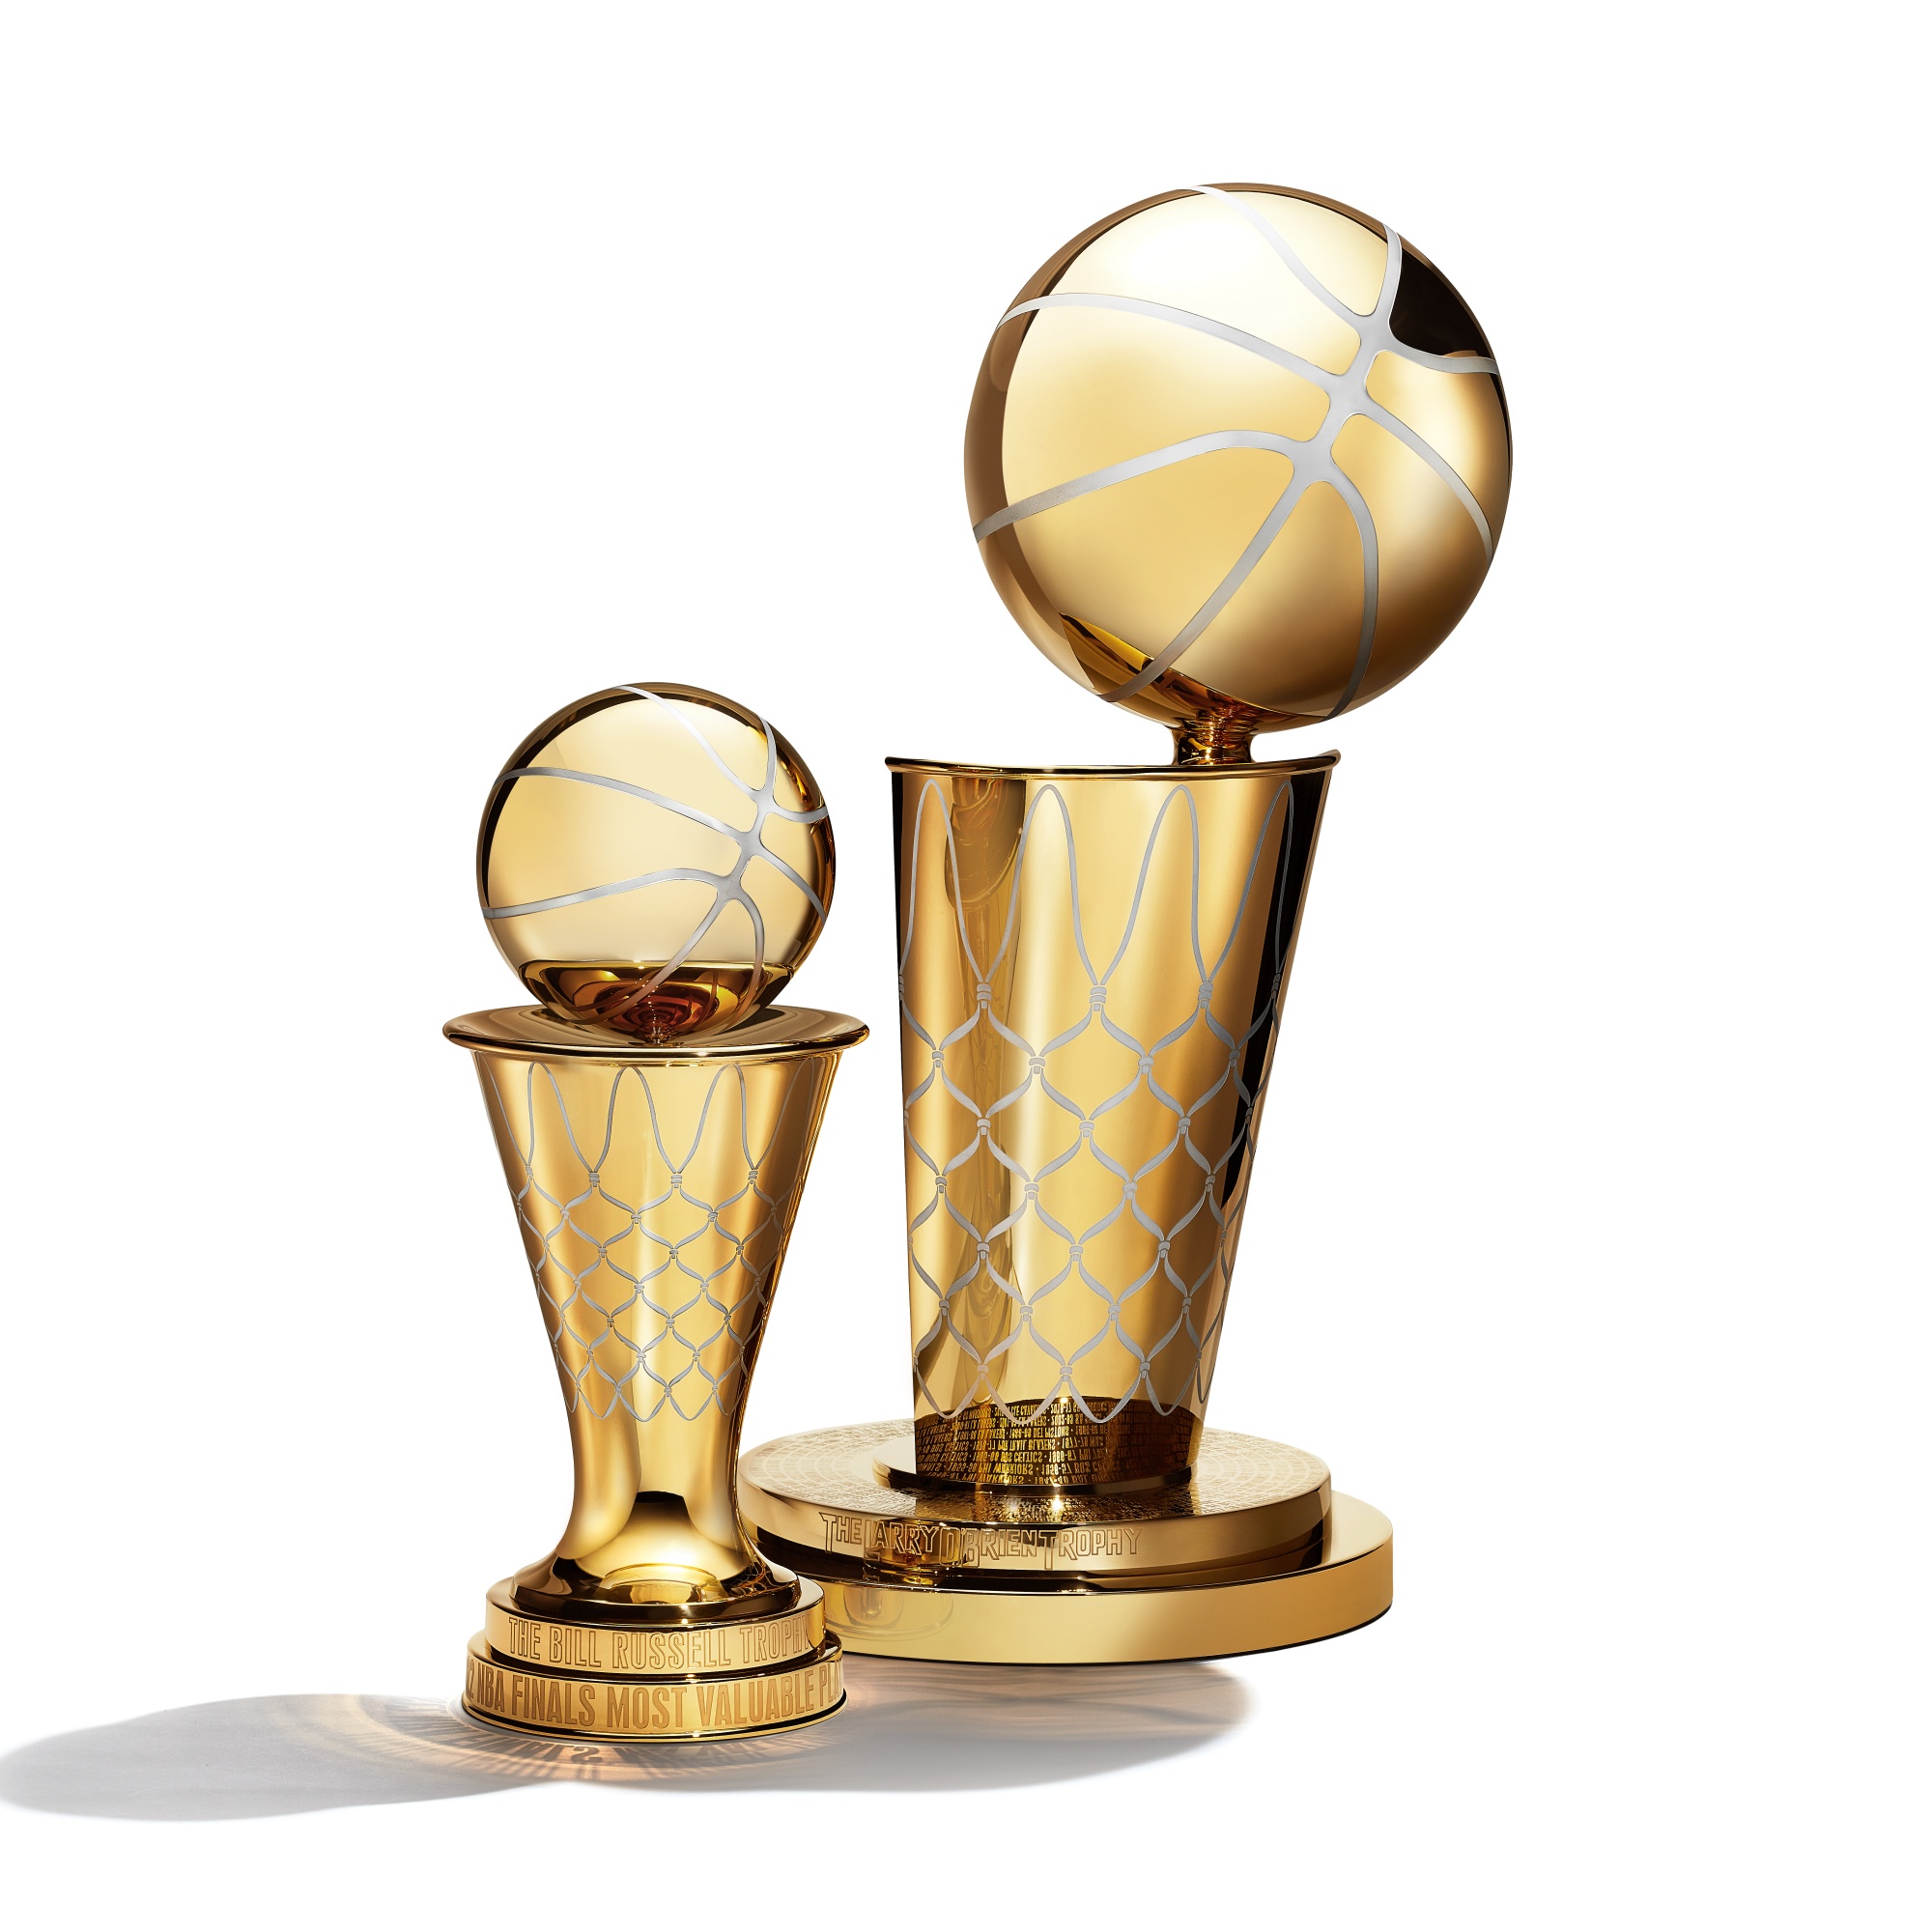 Larry O'Brien NBA Championship Trophy By Tiffany Is Redesigned: New Look -  Bloomberg